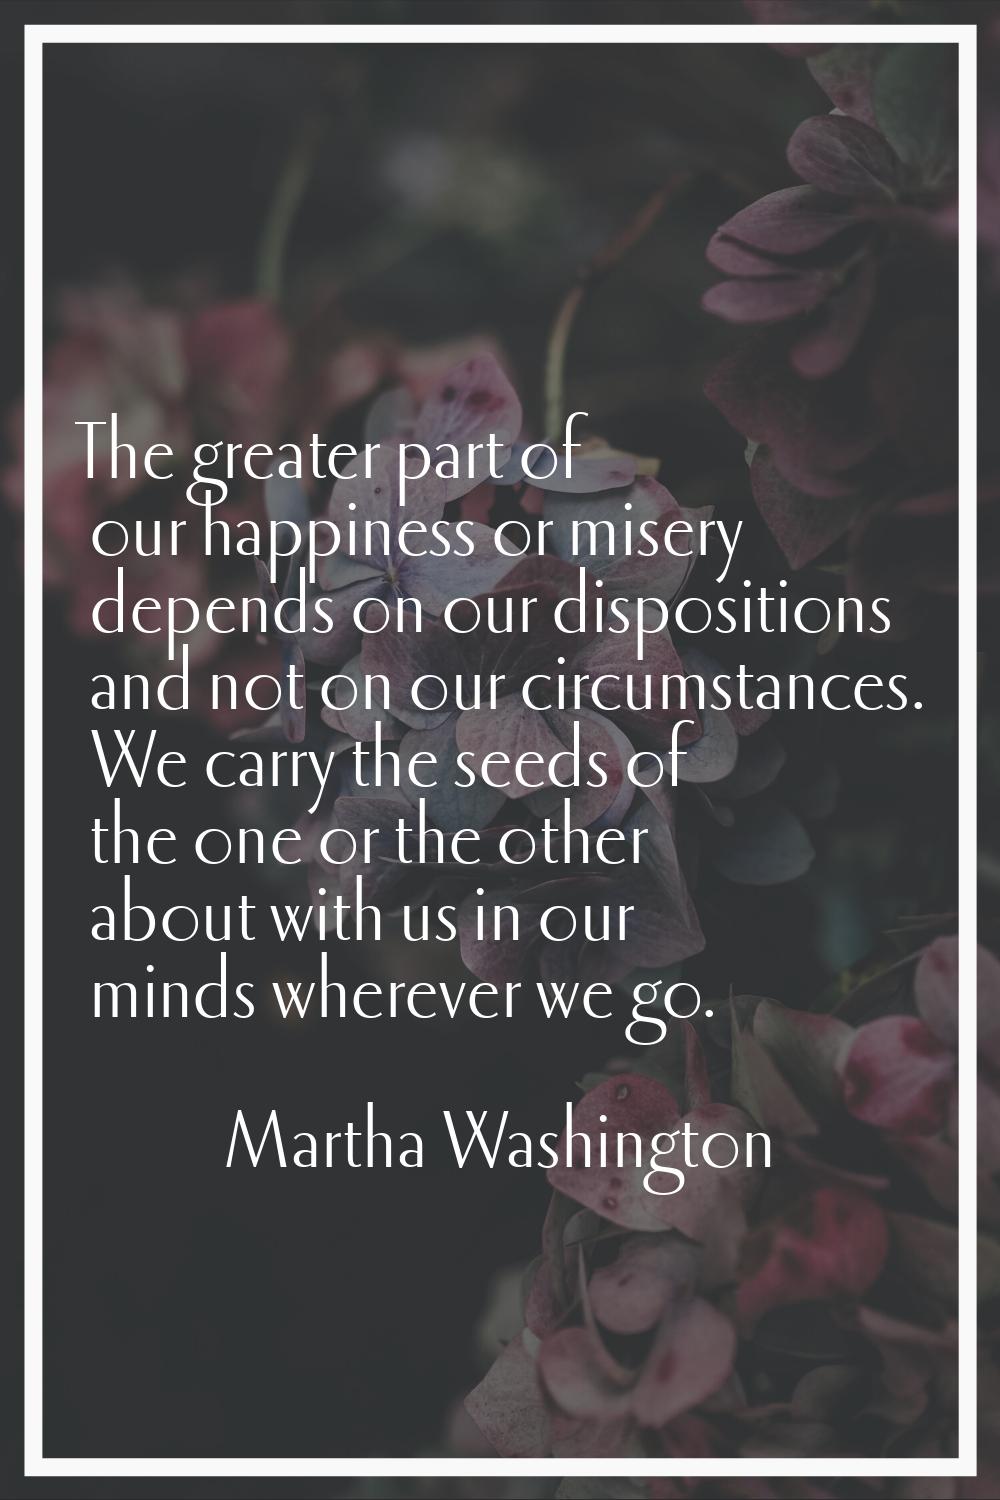 The greater part of our happiness or misery depends on our dispositions and not on our circumstance